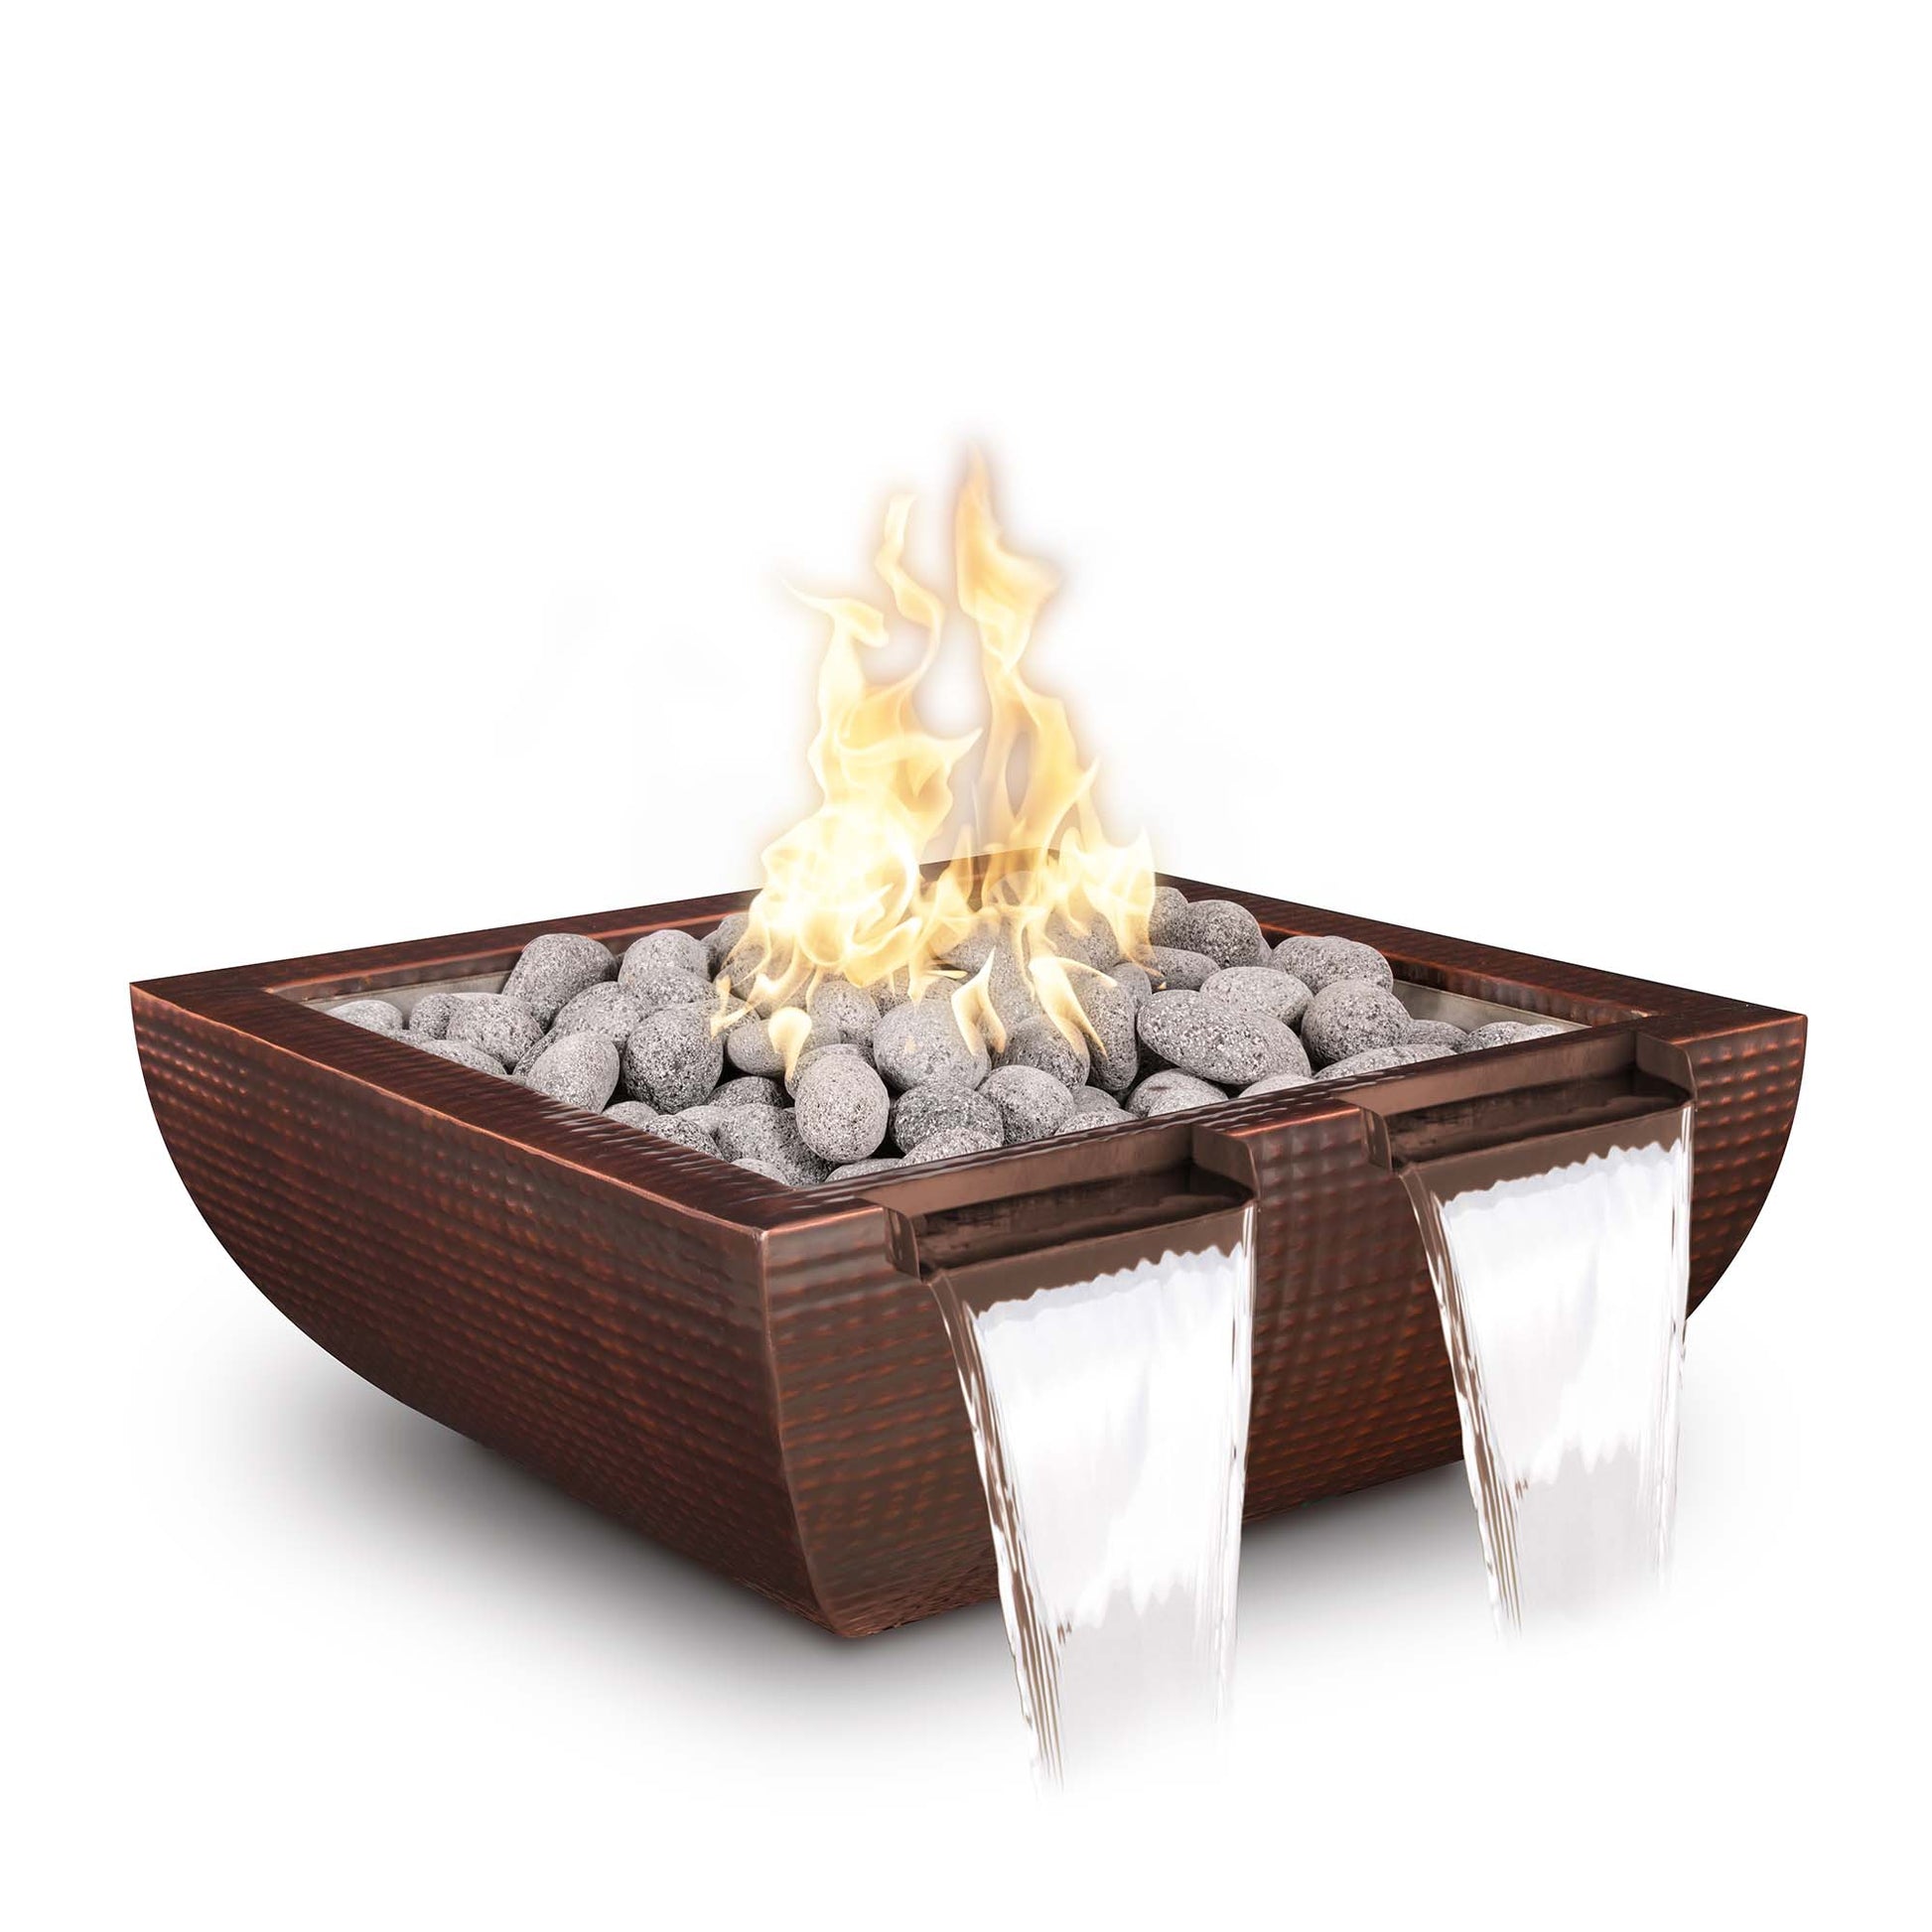 The Outdoor Plus Avalon Twin Spill 30" Gray Powder Coated Metal Liquid Propane Fire & Water Bowl with Match Lit Ignition